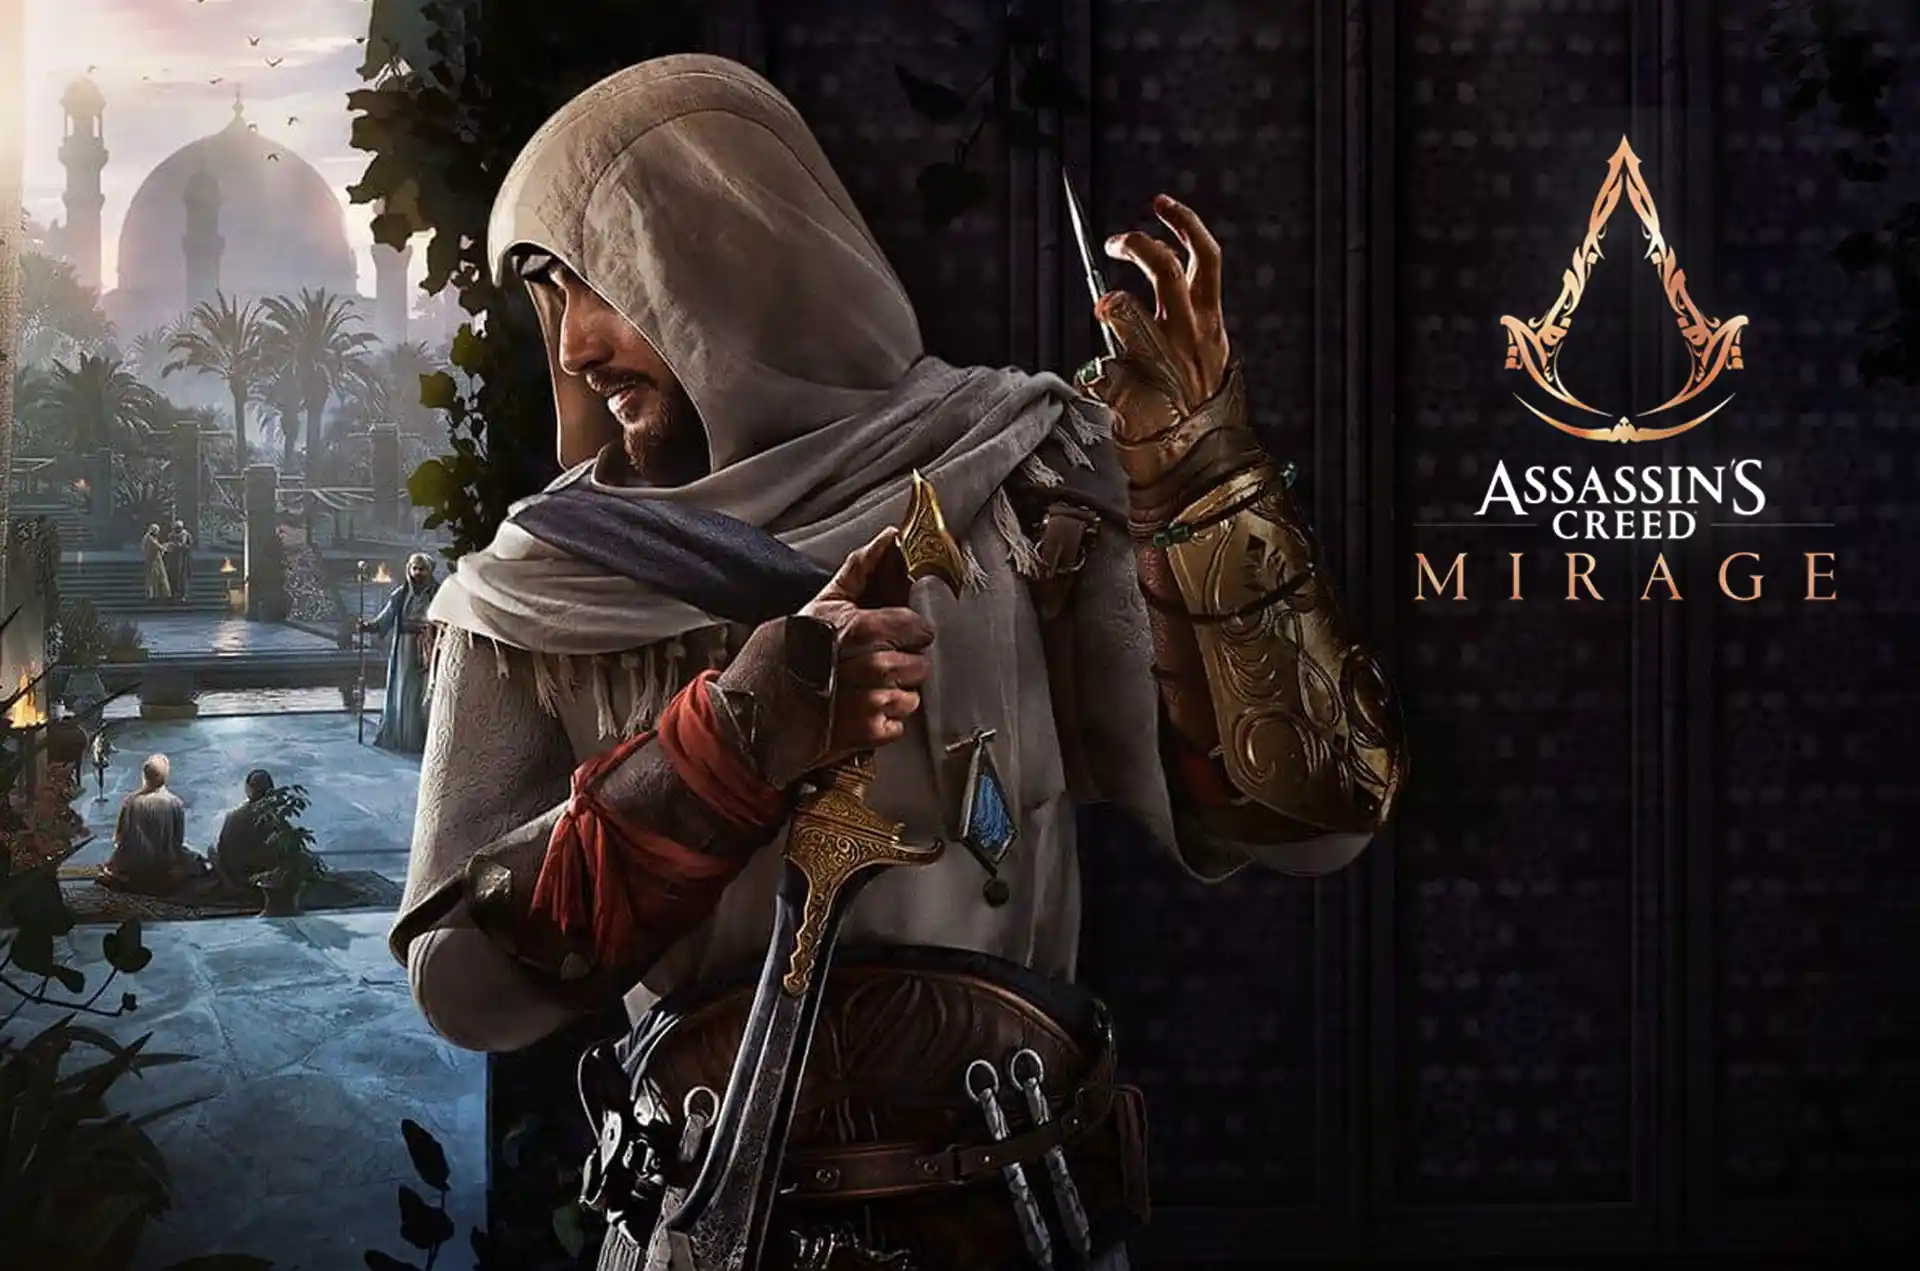 Presenting you Assassin's Creed Mirage